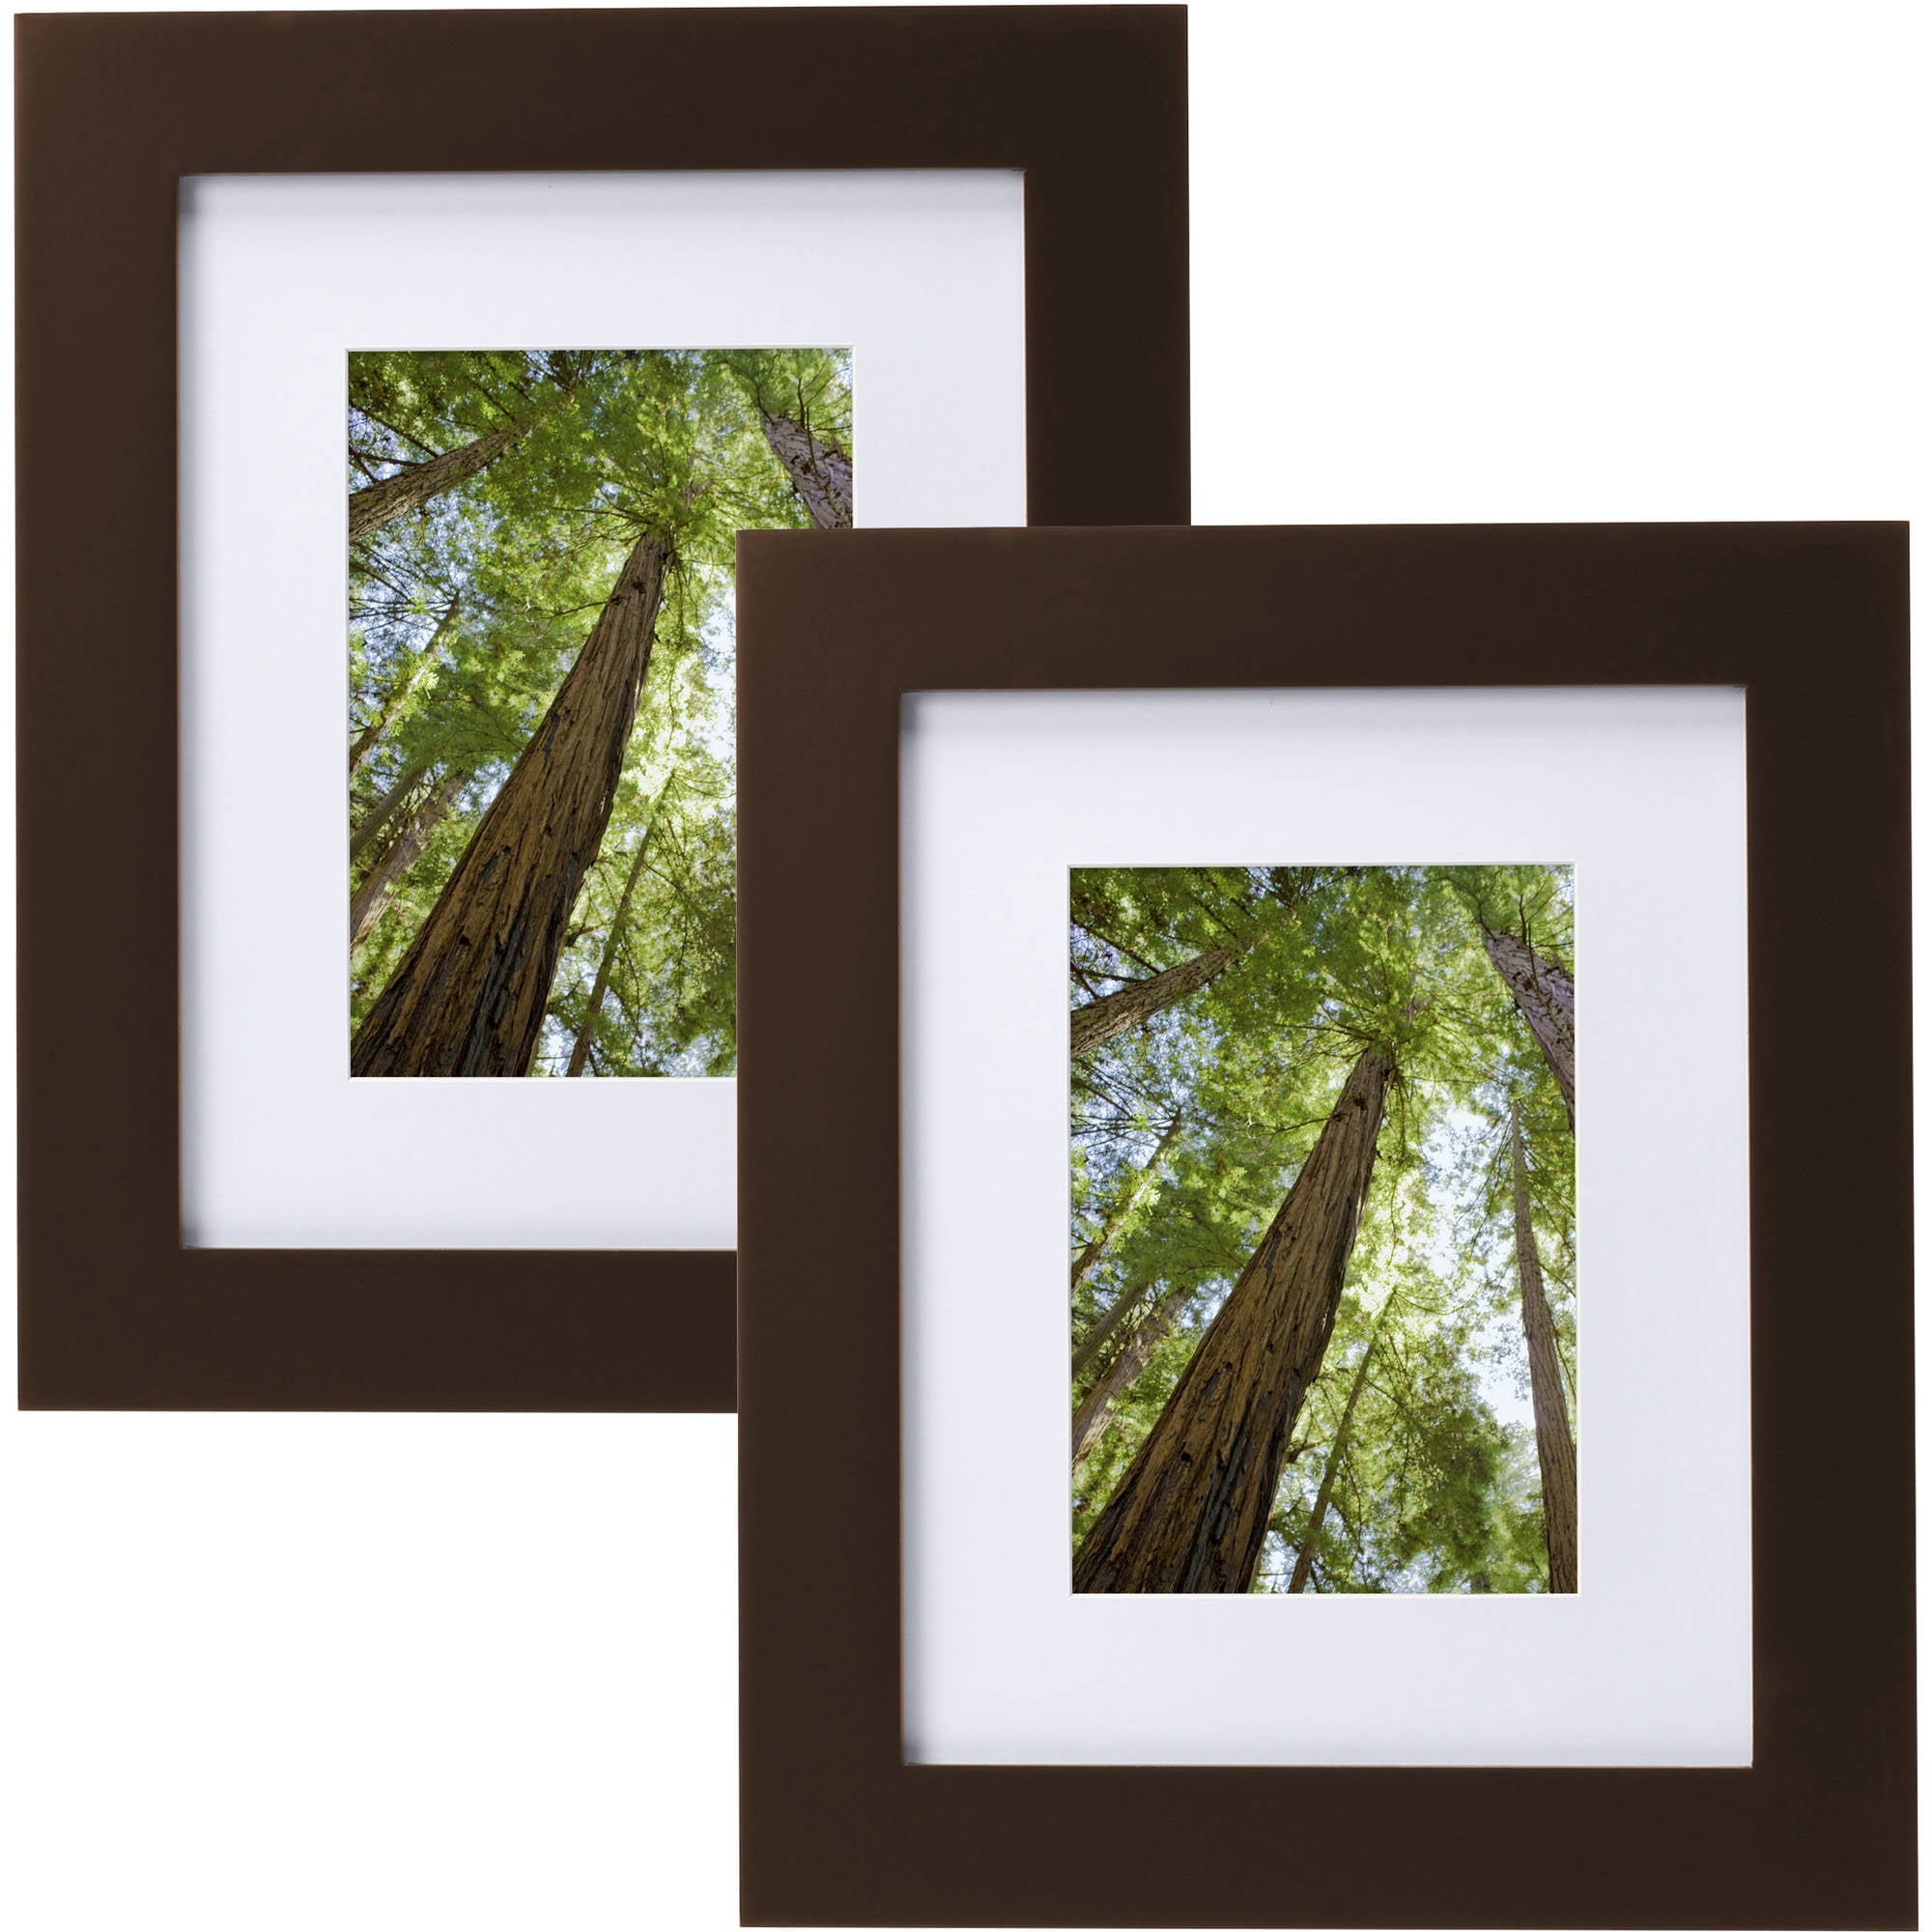 Mainstays Museum 16x20 Matted to 11x14 Flat Wide Gallery Picture Frame,  Mahogany 